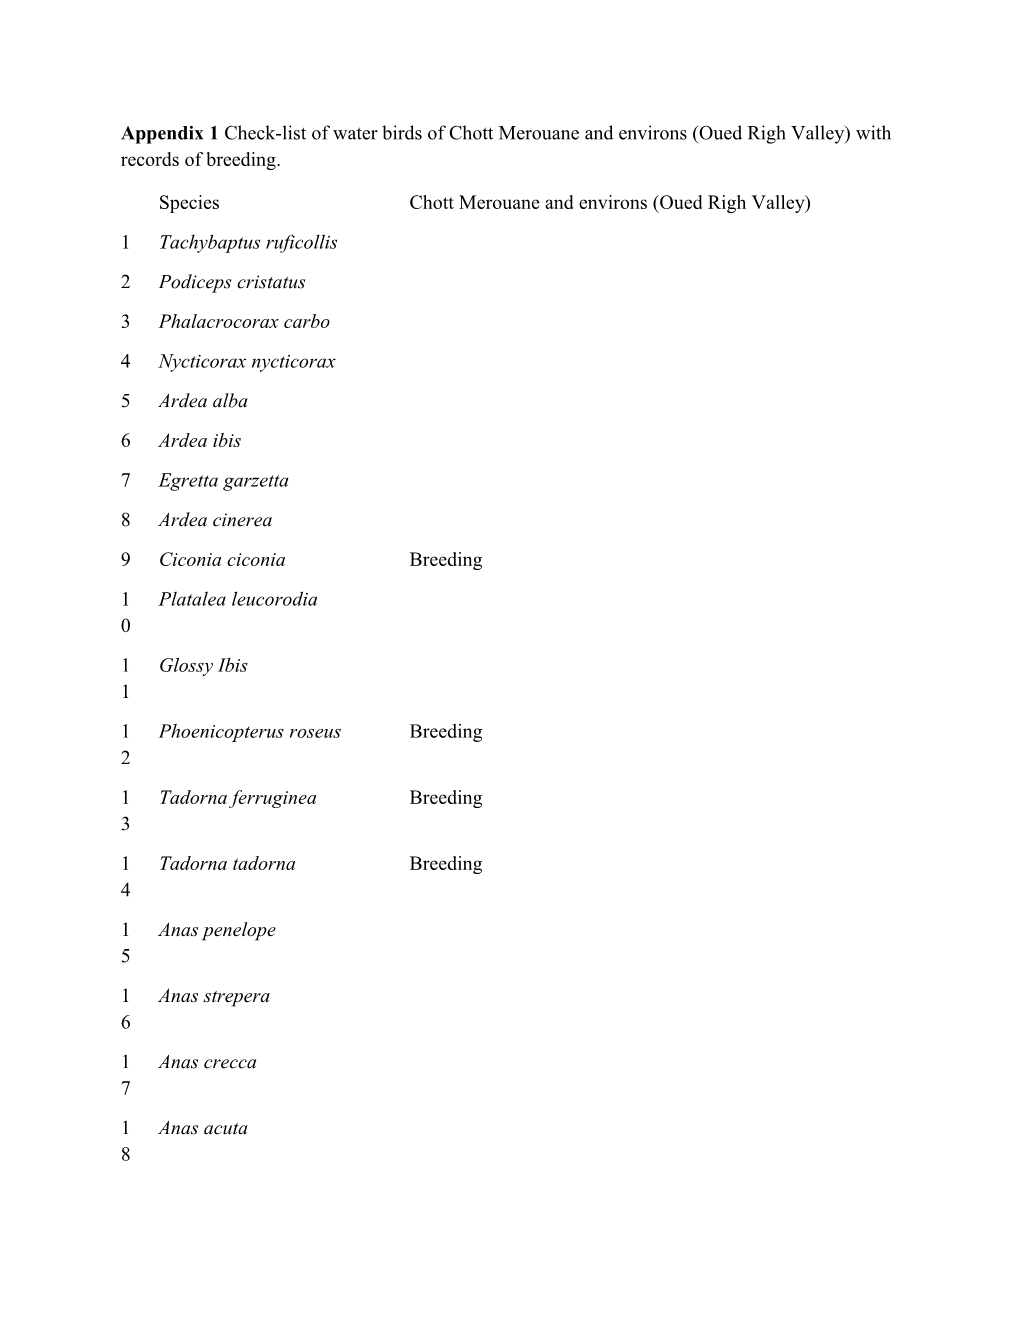 Appendix 2 Questionnaire Used During the Study